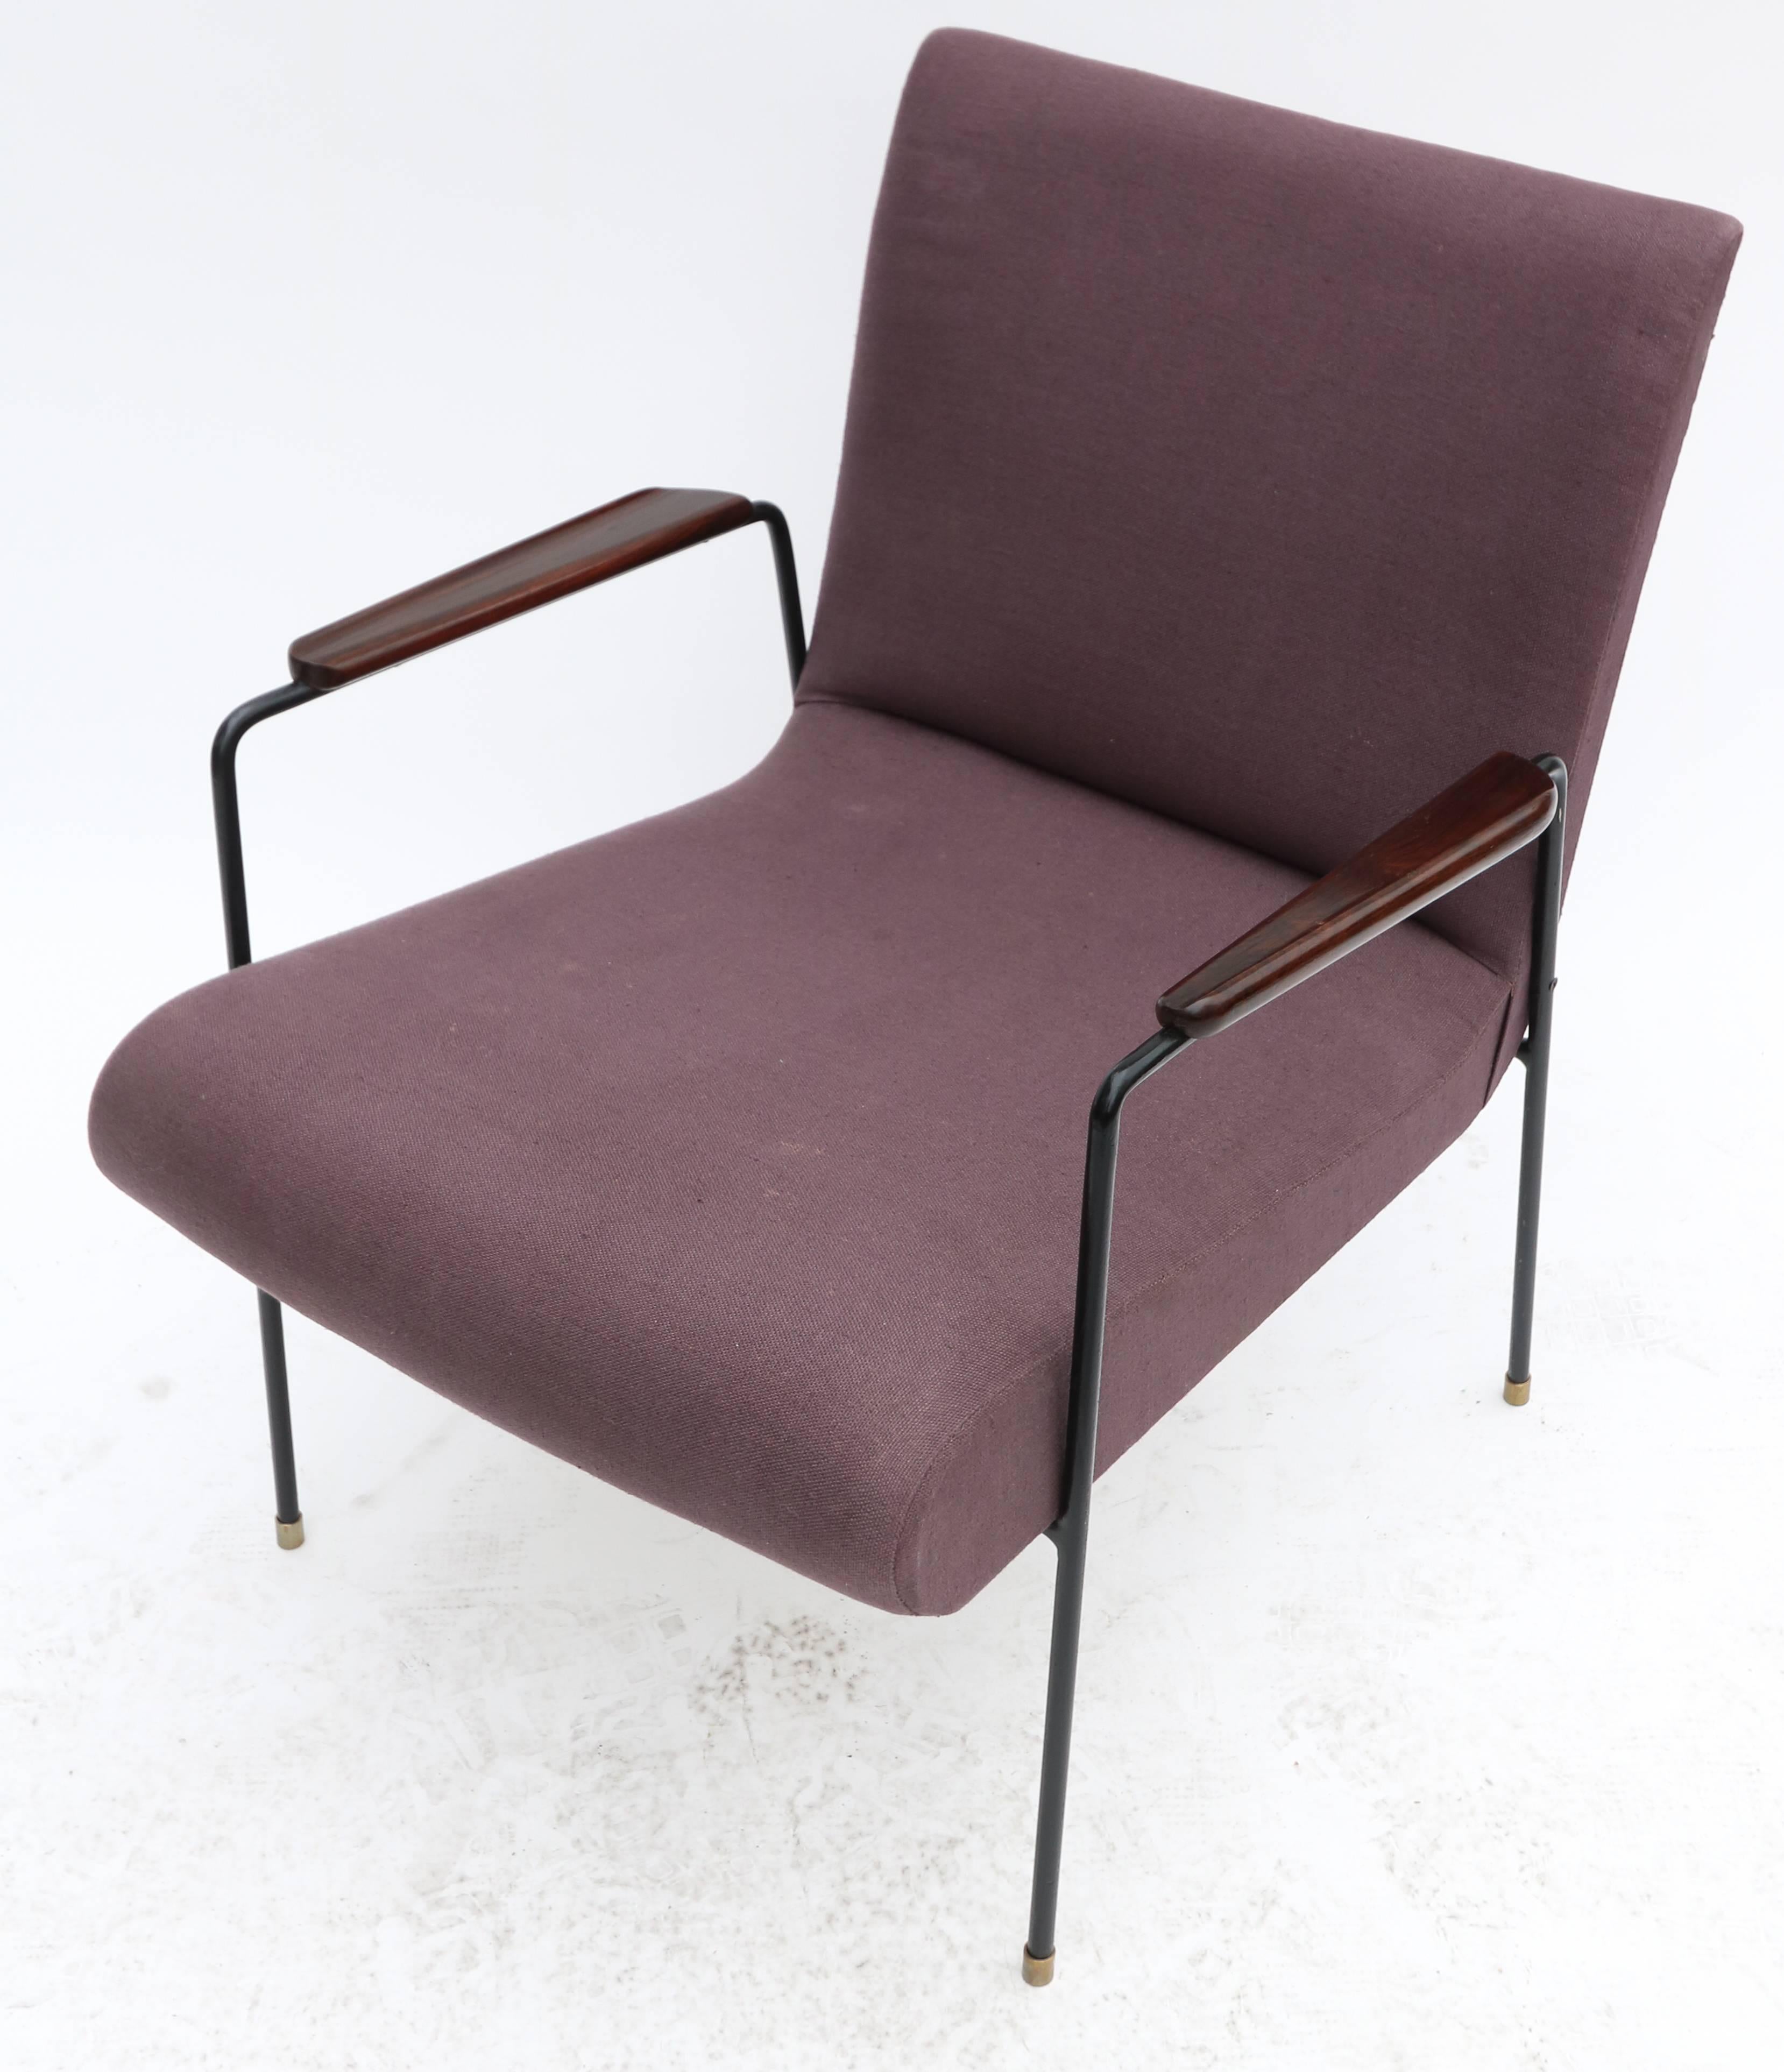 Pair of 1960s black metal armchairs with Brazilian jacaranda wood armrests, upholstered in violet linen.